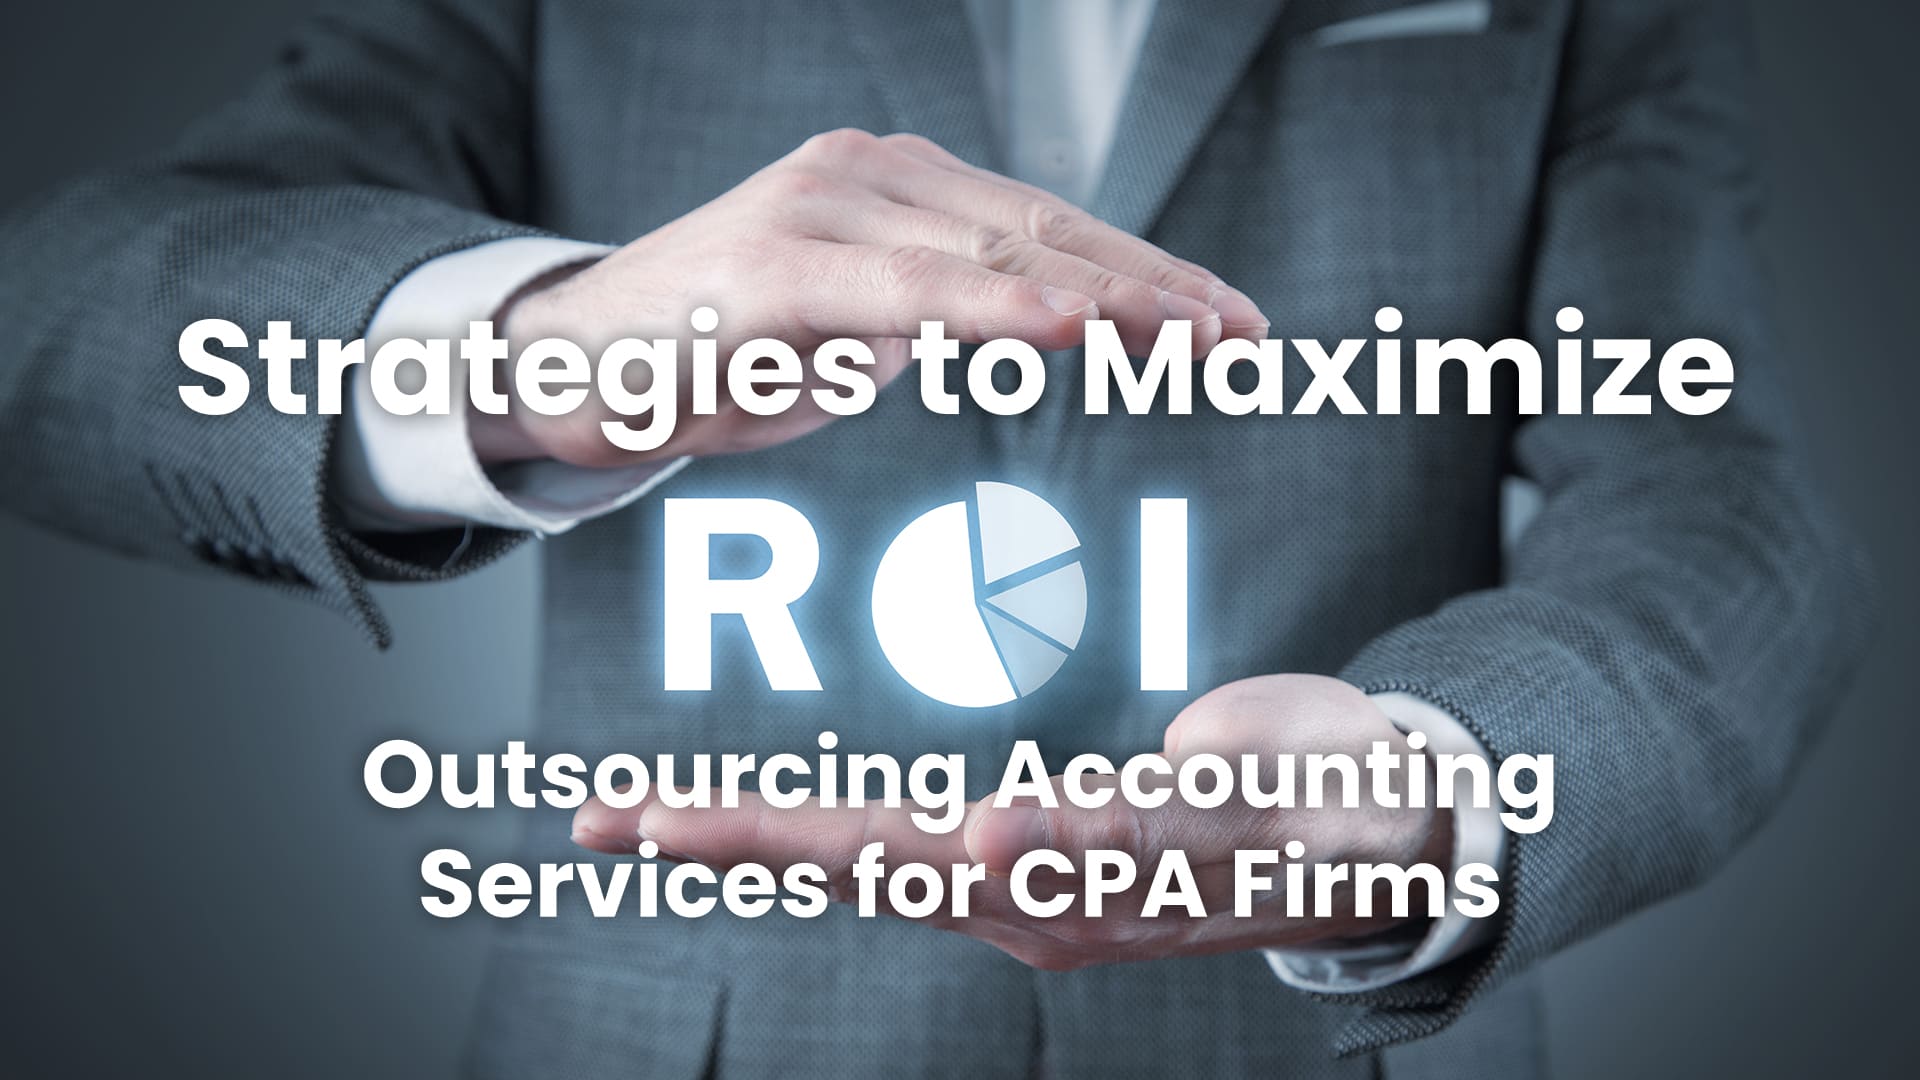 Outsourcing Accounting Services for CPA Firms